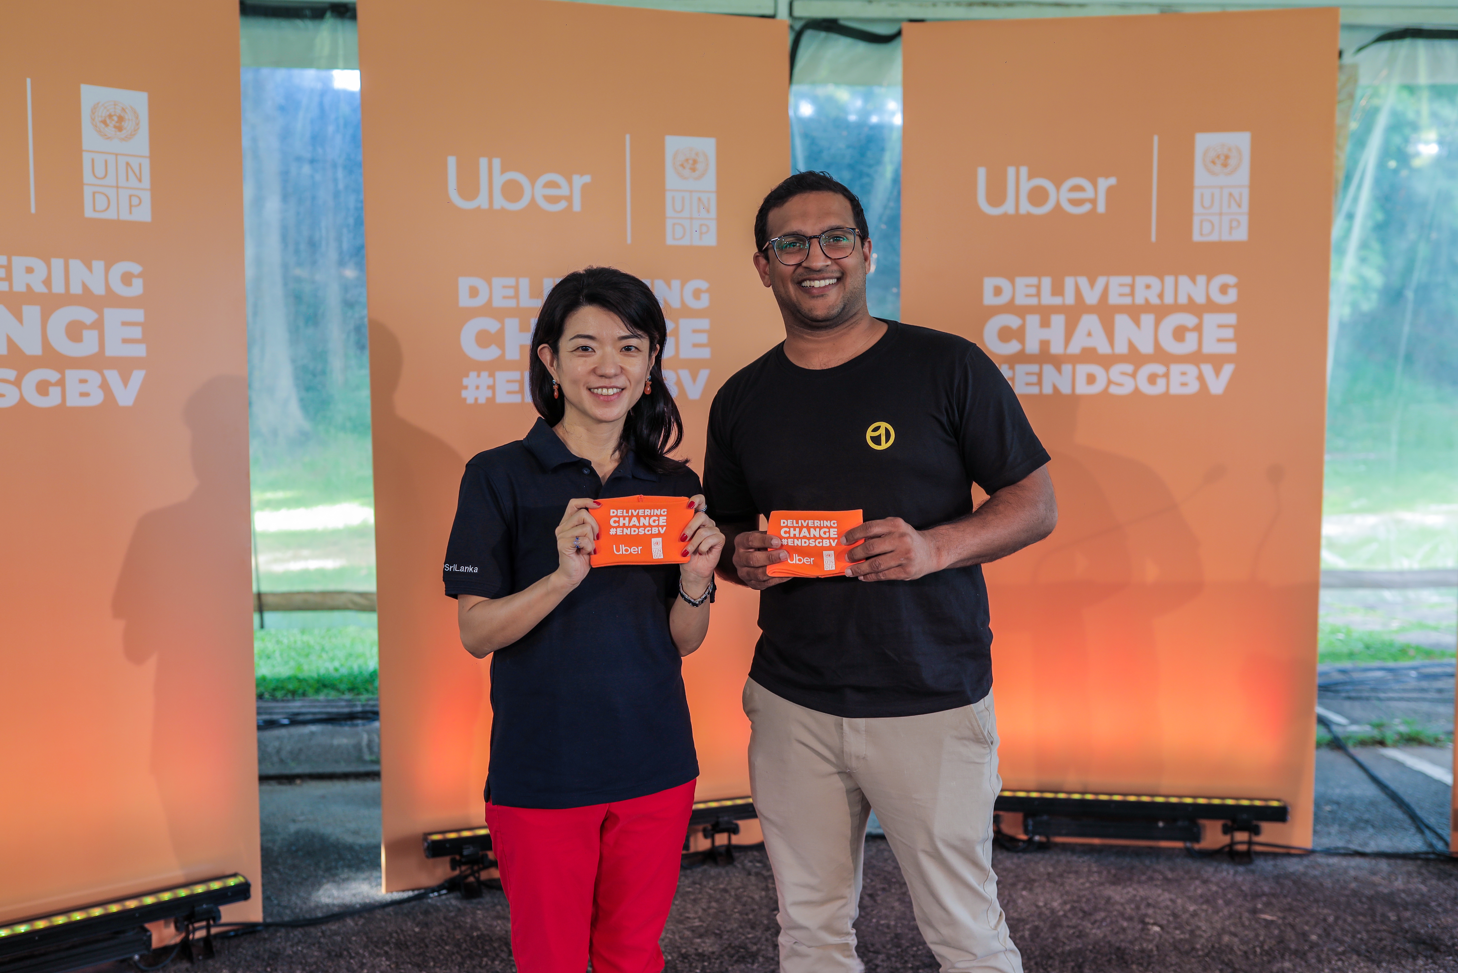 UNDP SL Res Rep & UBER Eats General Manager at the Campaign Launch event